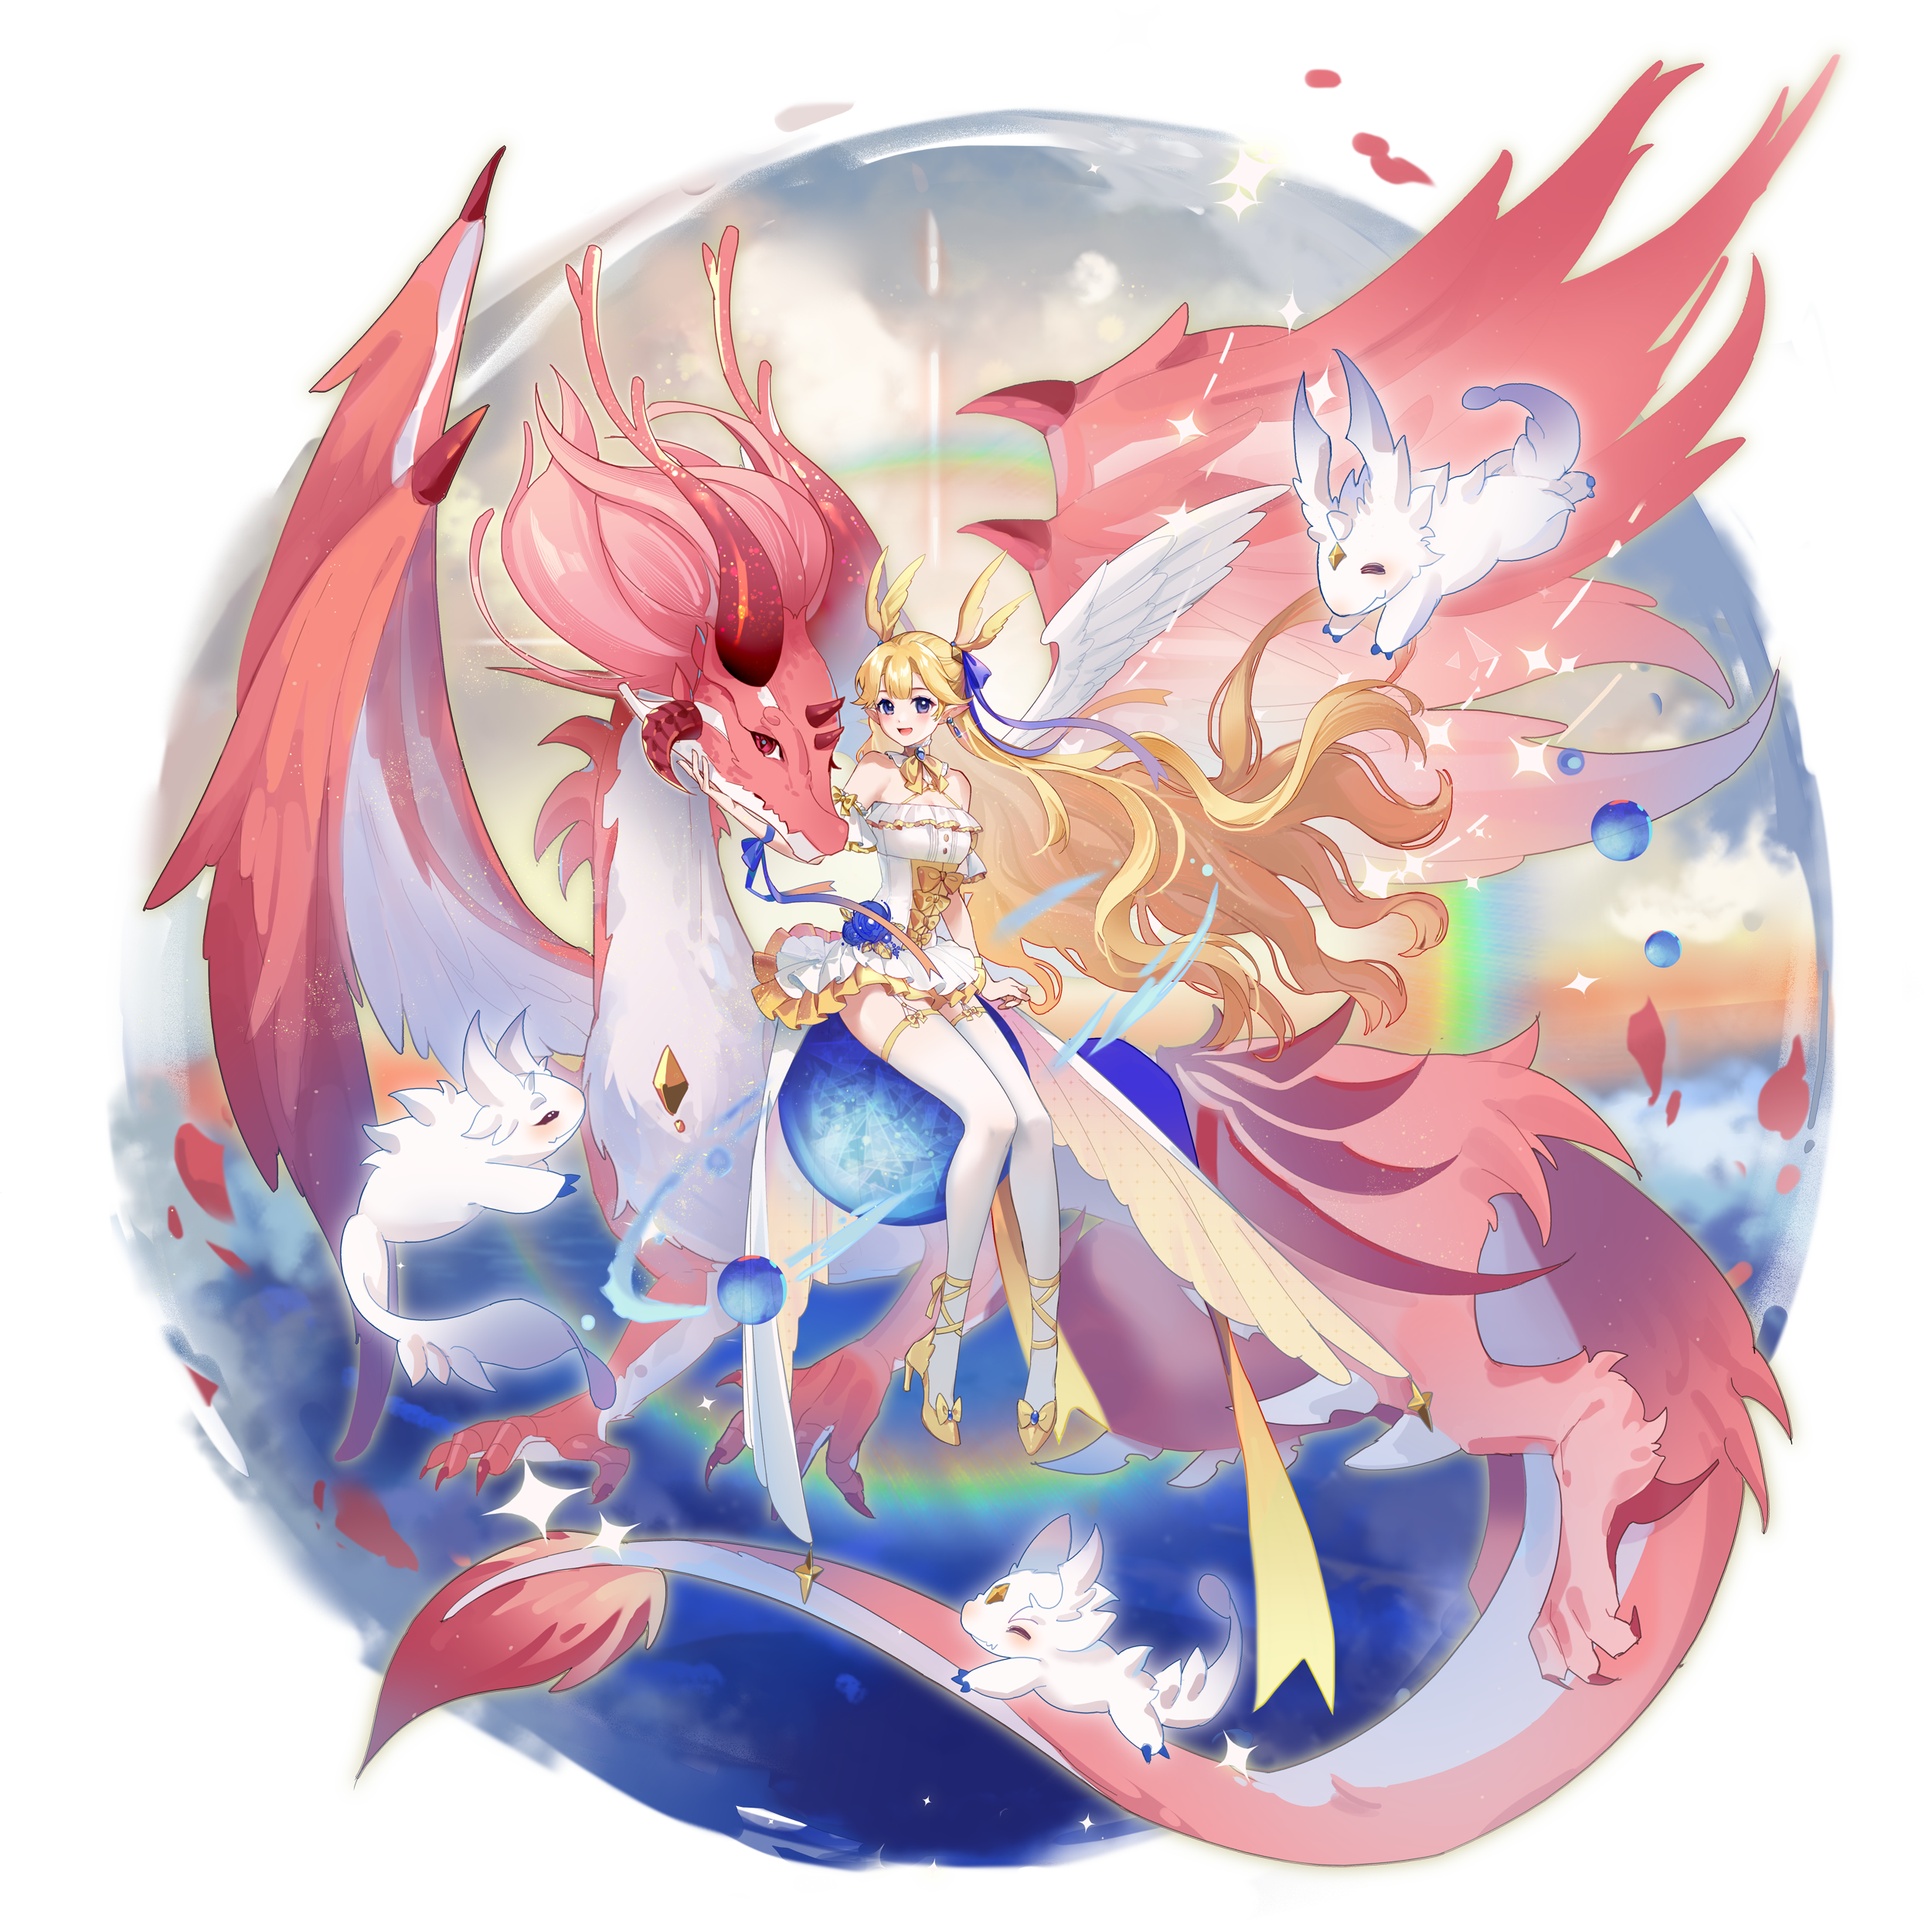 Anime 2500x2500 Aura star anime girls wings blonde dragon creature pointy ears petals